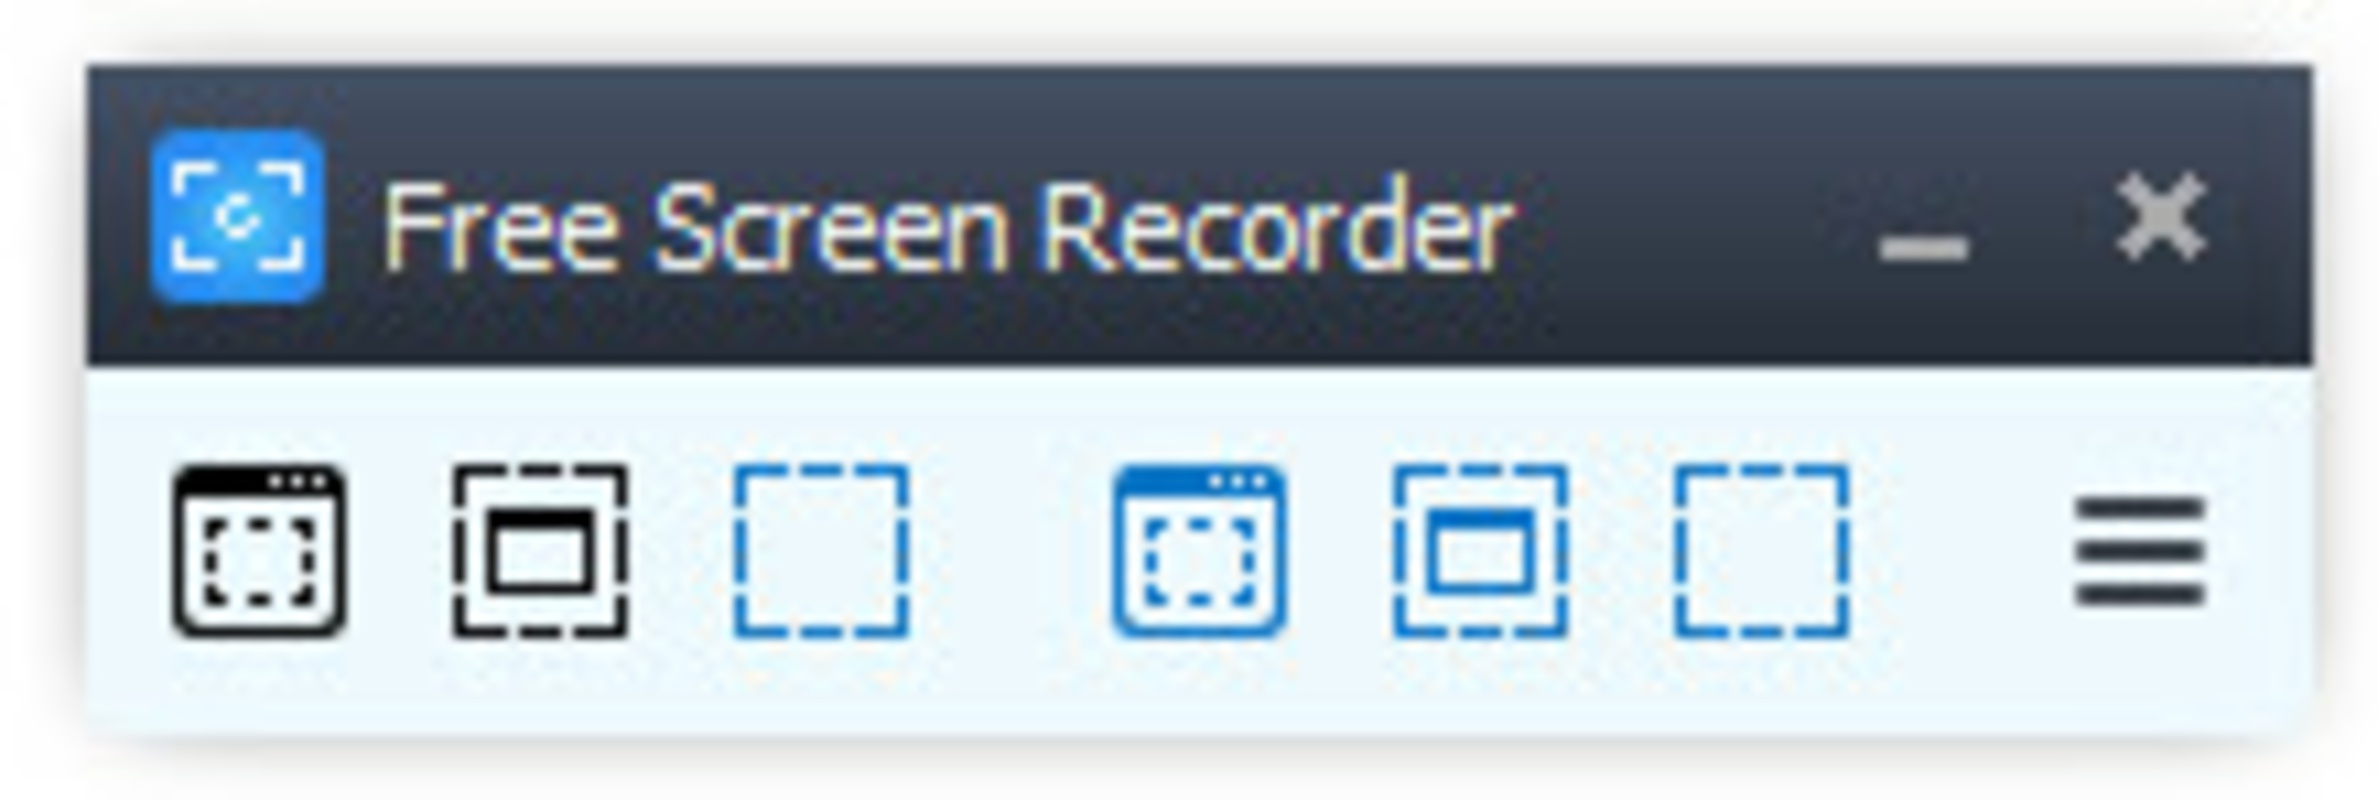 Free Screen Video Recorder 3.1.1.1024 feature